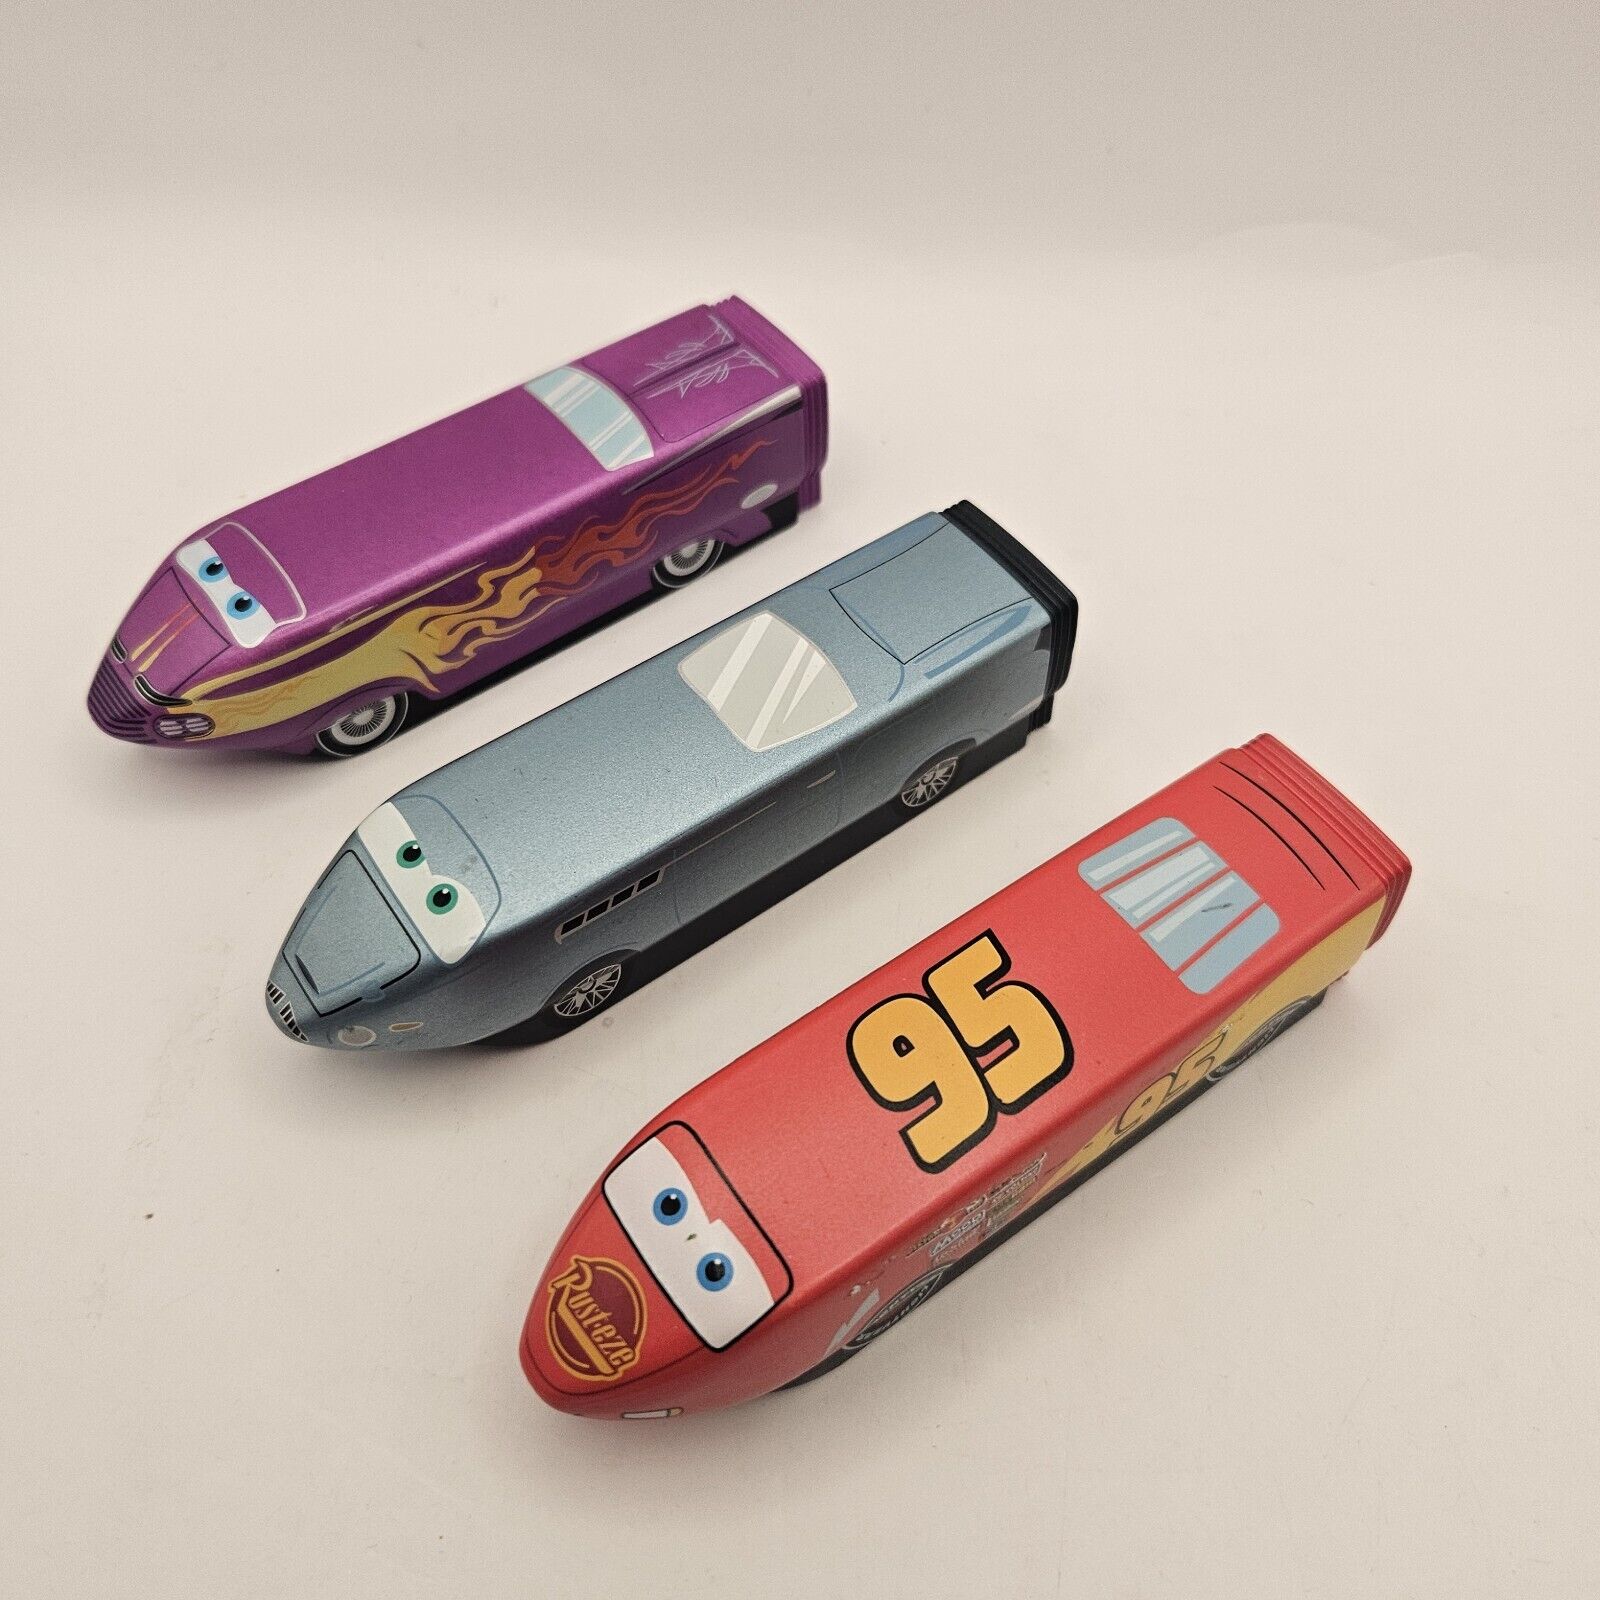 Disney Vinylmation Cars Monorail Collection - LOT OF 3